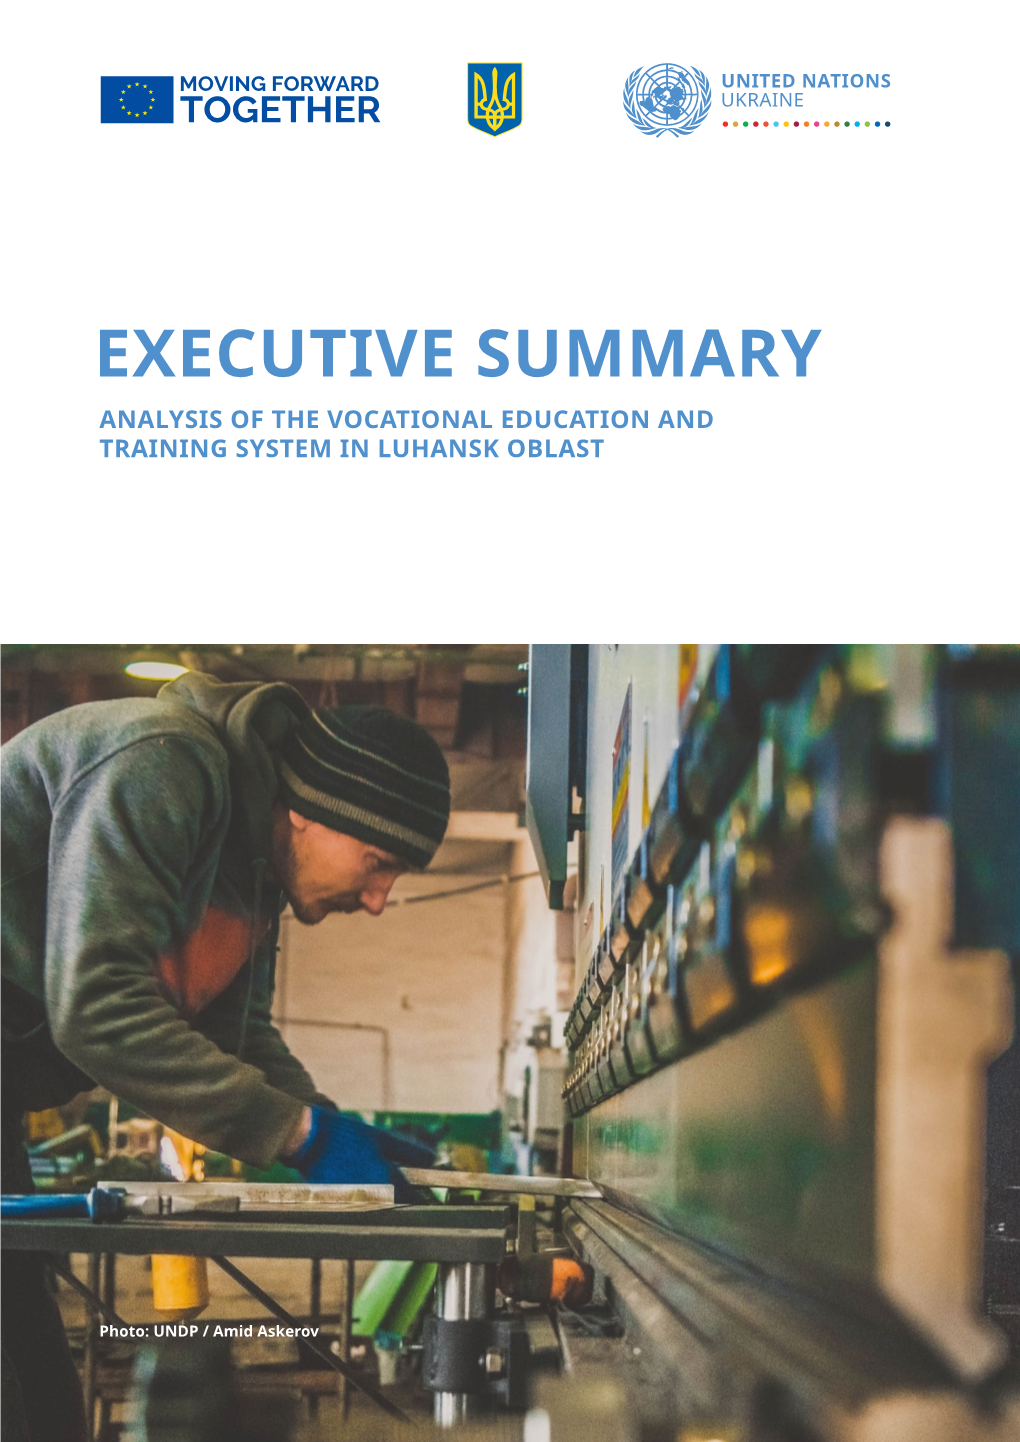 Executive Summary Analysis of the Vocational Education and Training System in Luhansk Oblast